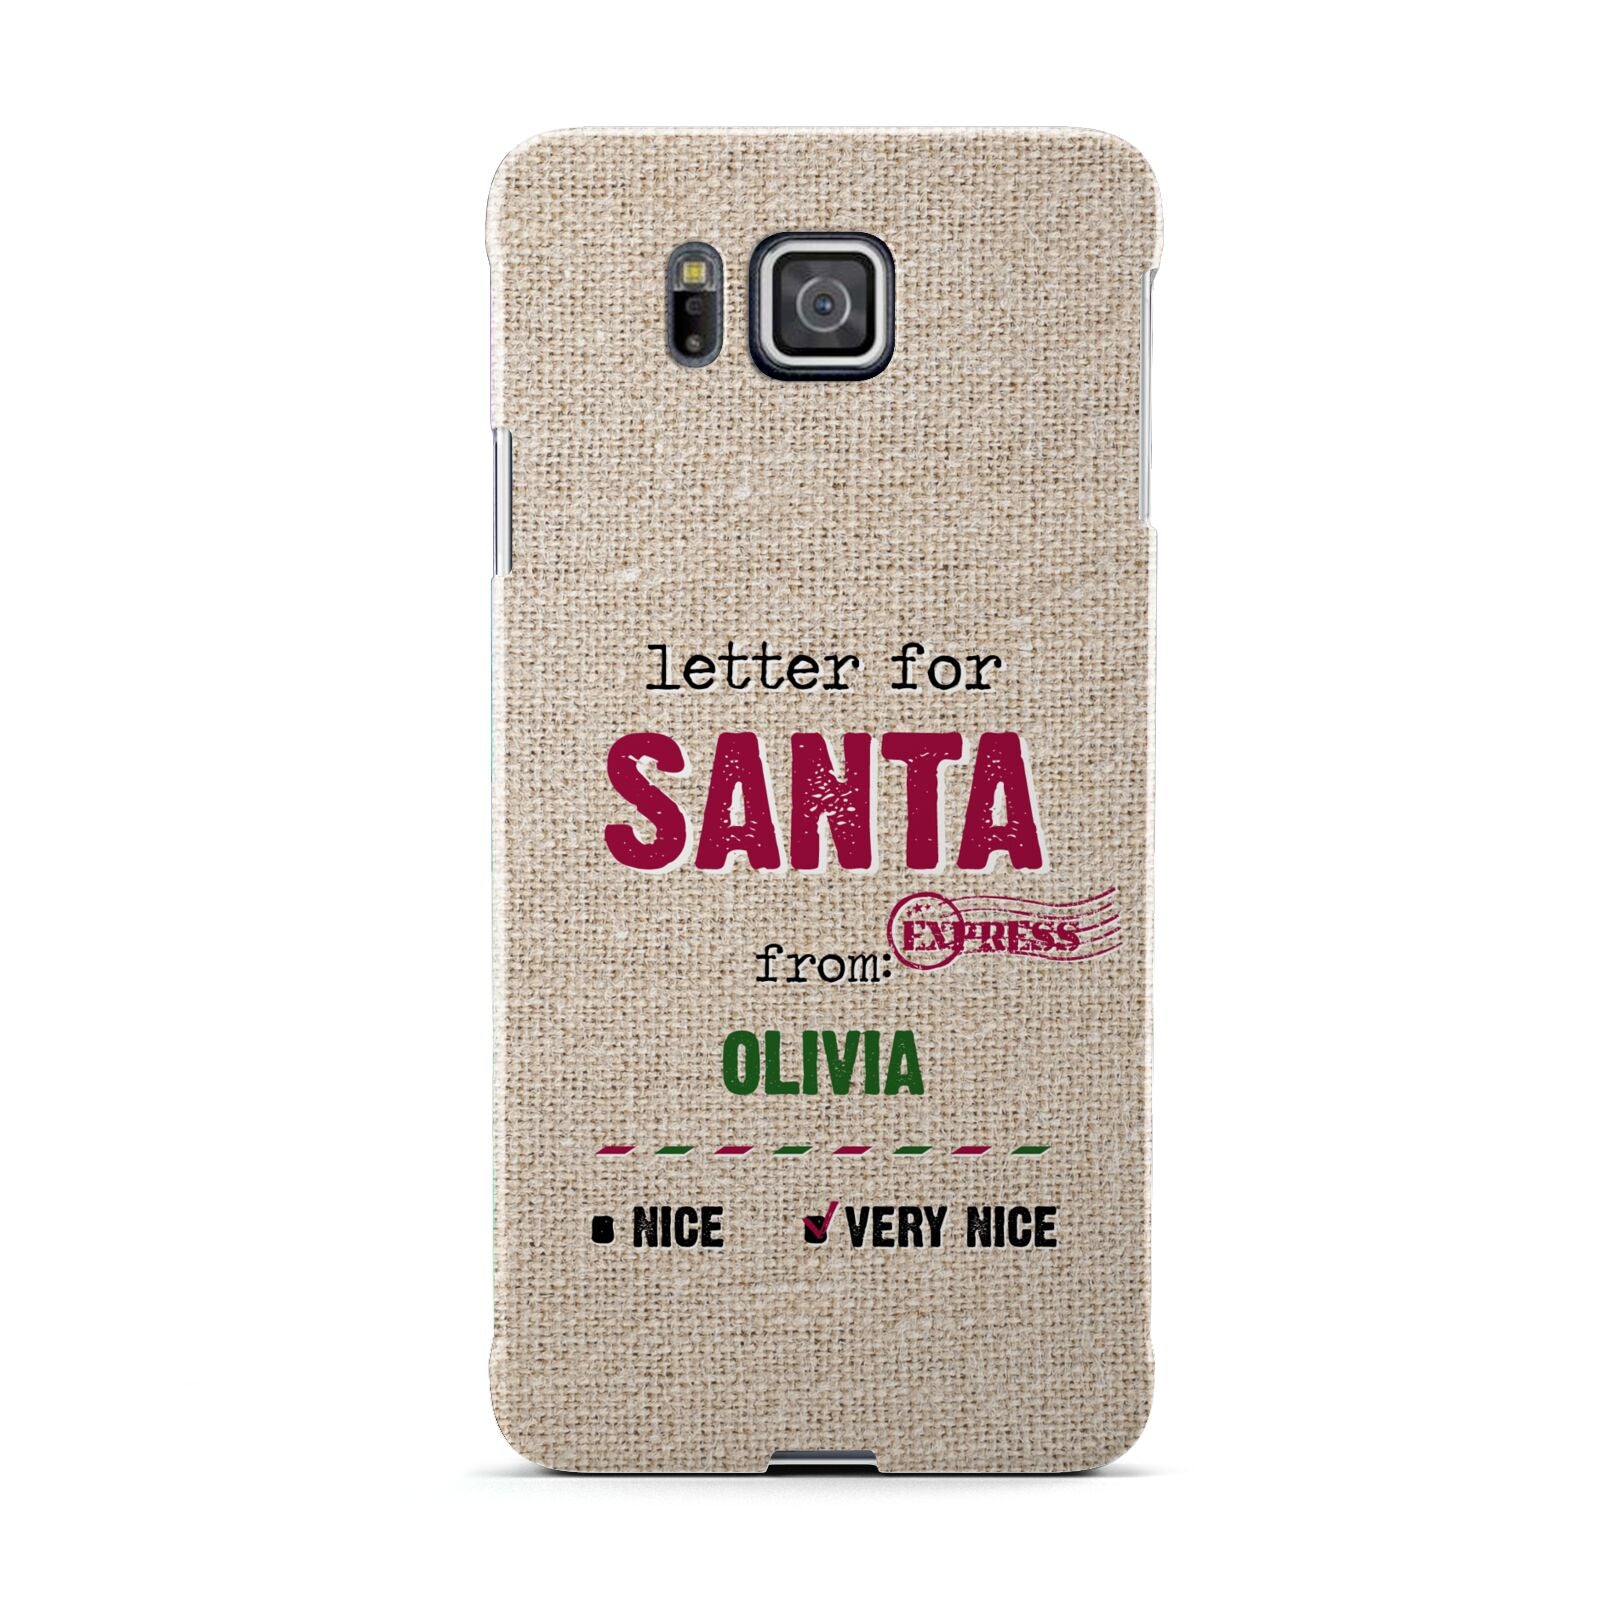 Letters to Santa Personalised Samsung Galaxy Alpha Case